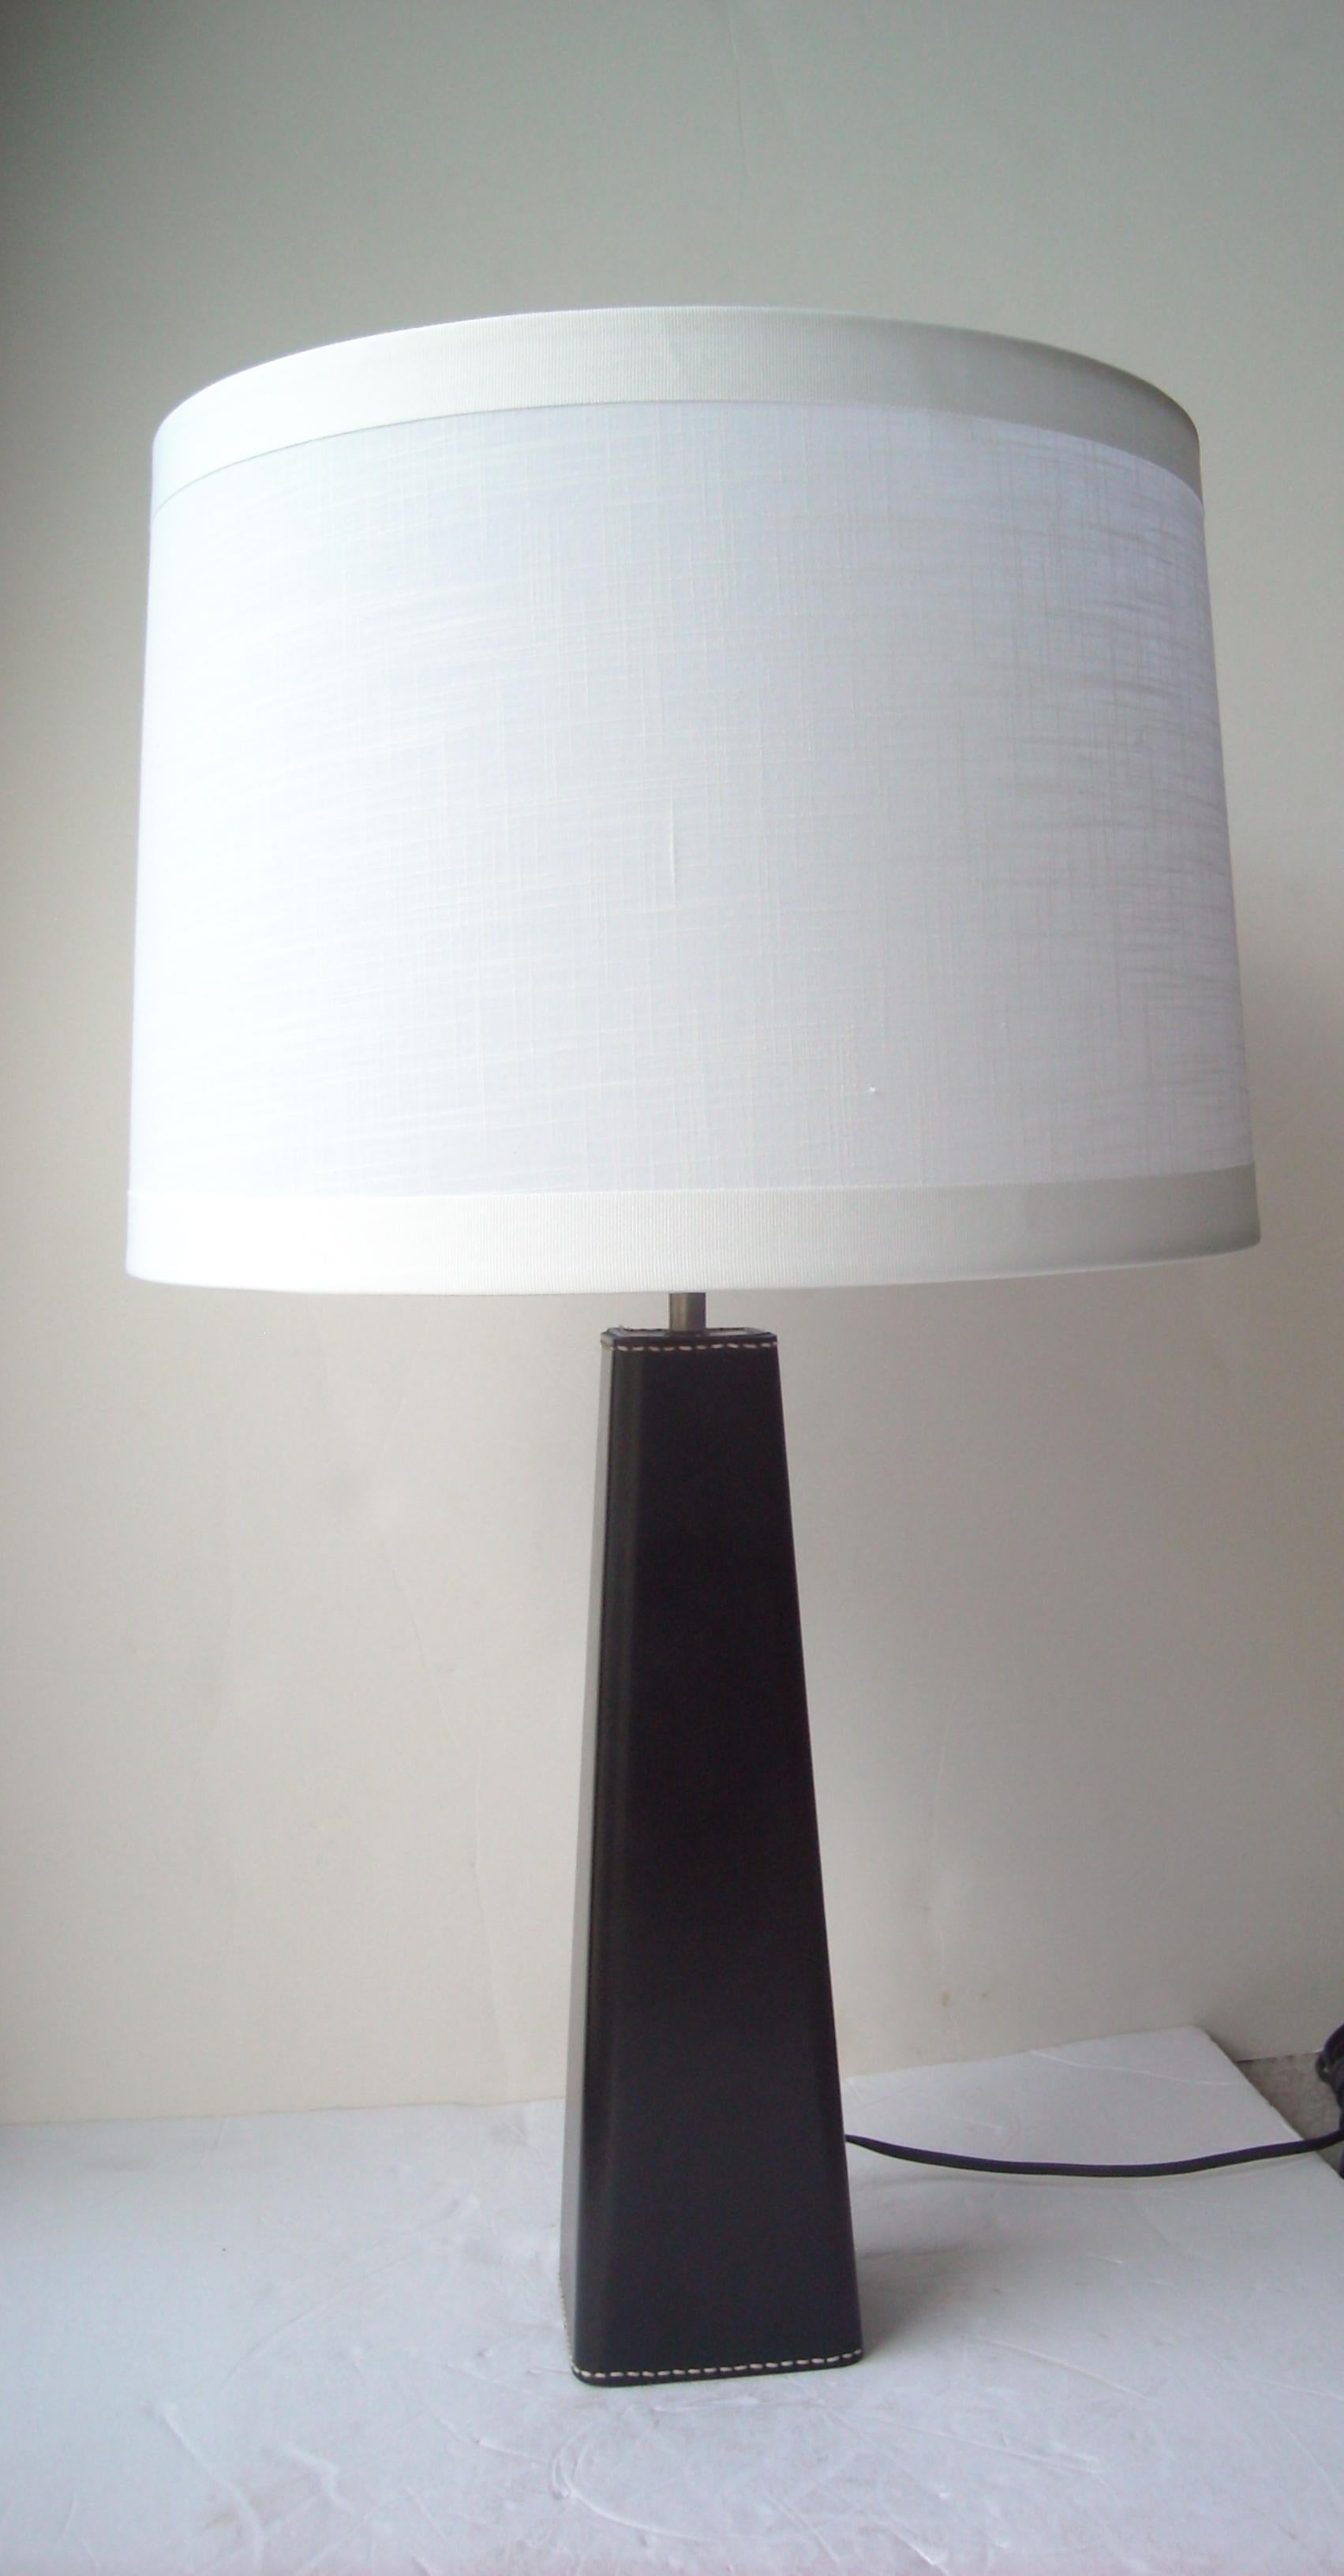 Illums Bolighus Leather Table Lamp Designed by Lisa Johansson Pape, Denmark In Good Condition For Sale In Los Angeles, CA